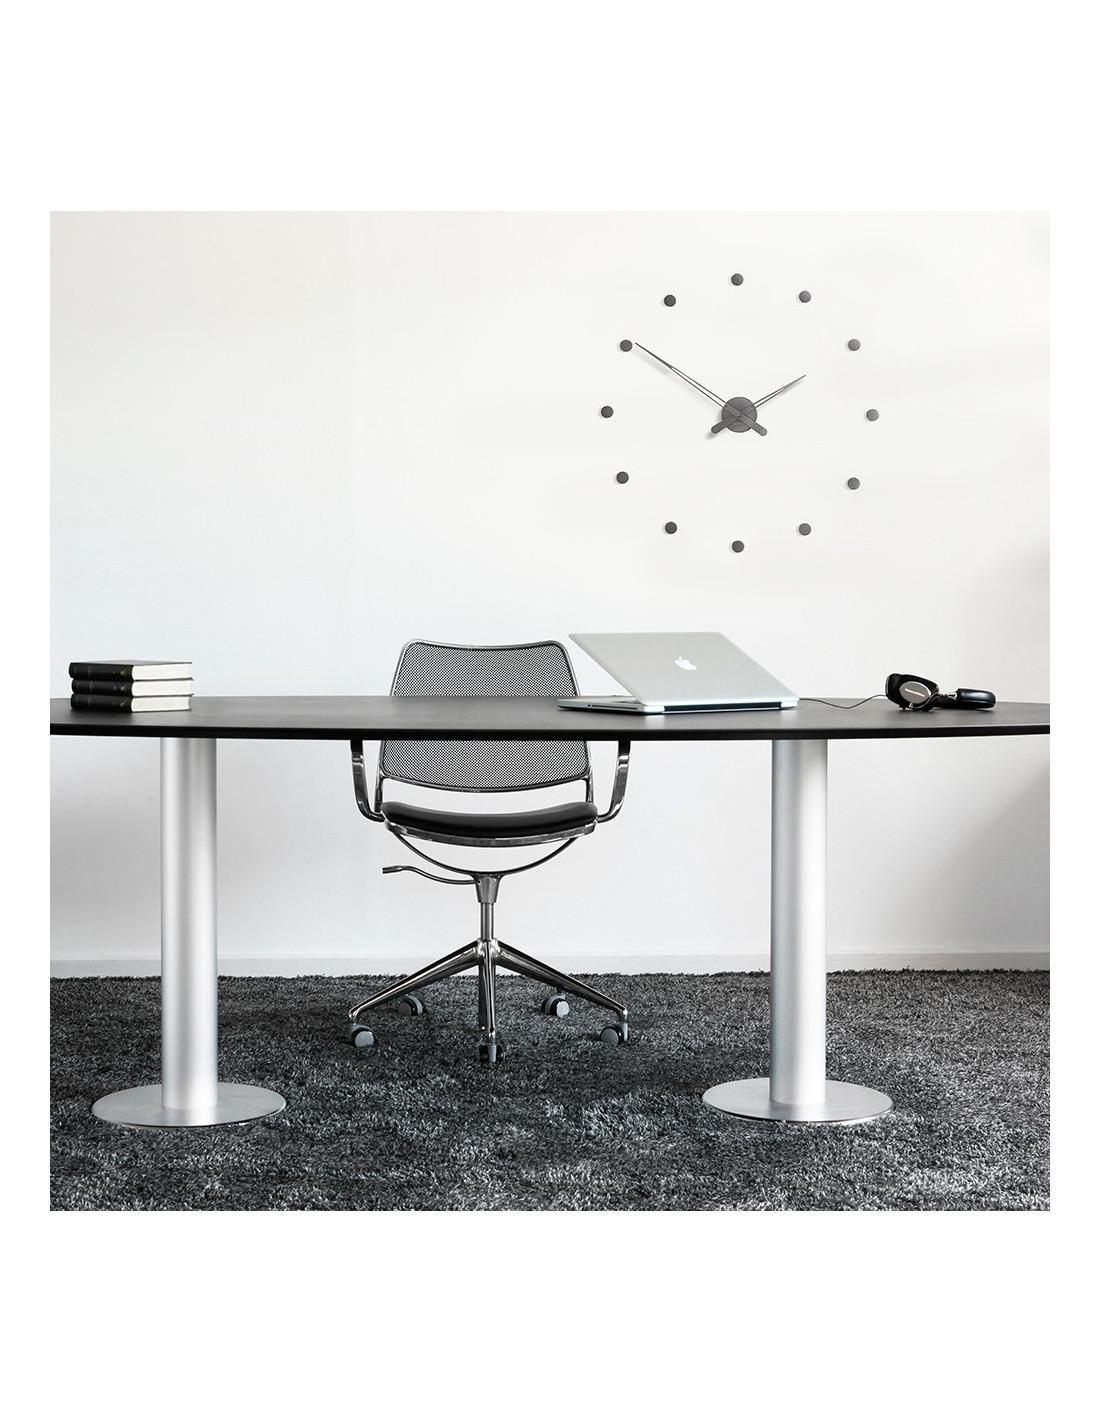 The Rodón 12 T Clock is a wall clock with a serious and discreet aesthetic making it an ideal clock for spaces such as offices or business centers and meetings.
The Rodón 12 T Clock: Graphite Brass and Steel.
Each clock is a unique handmade